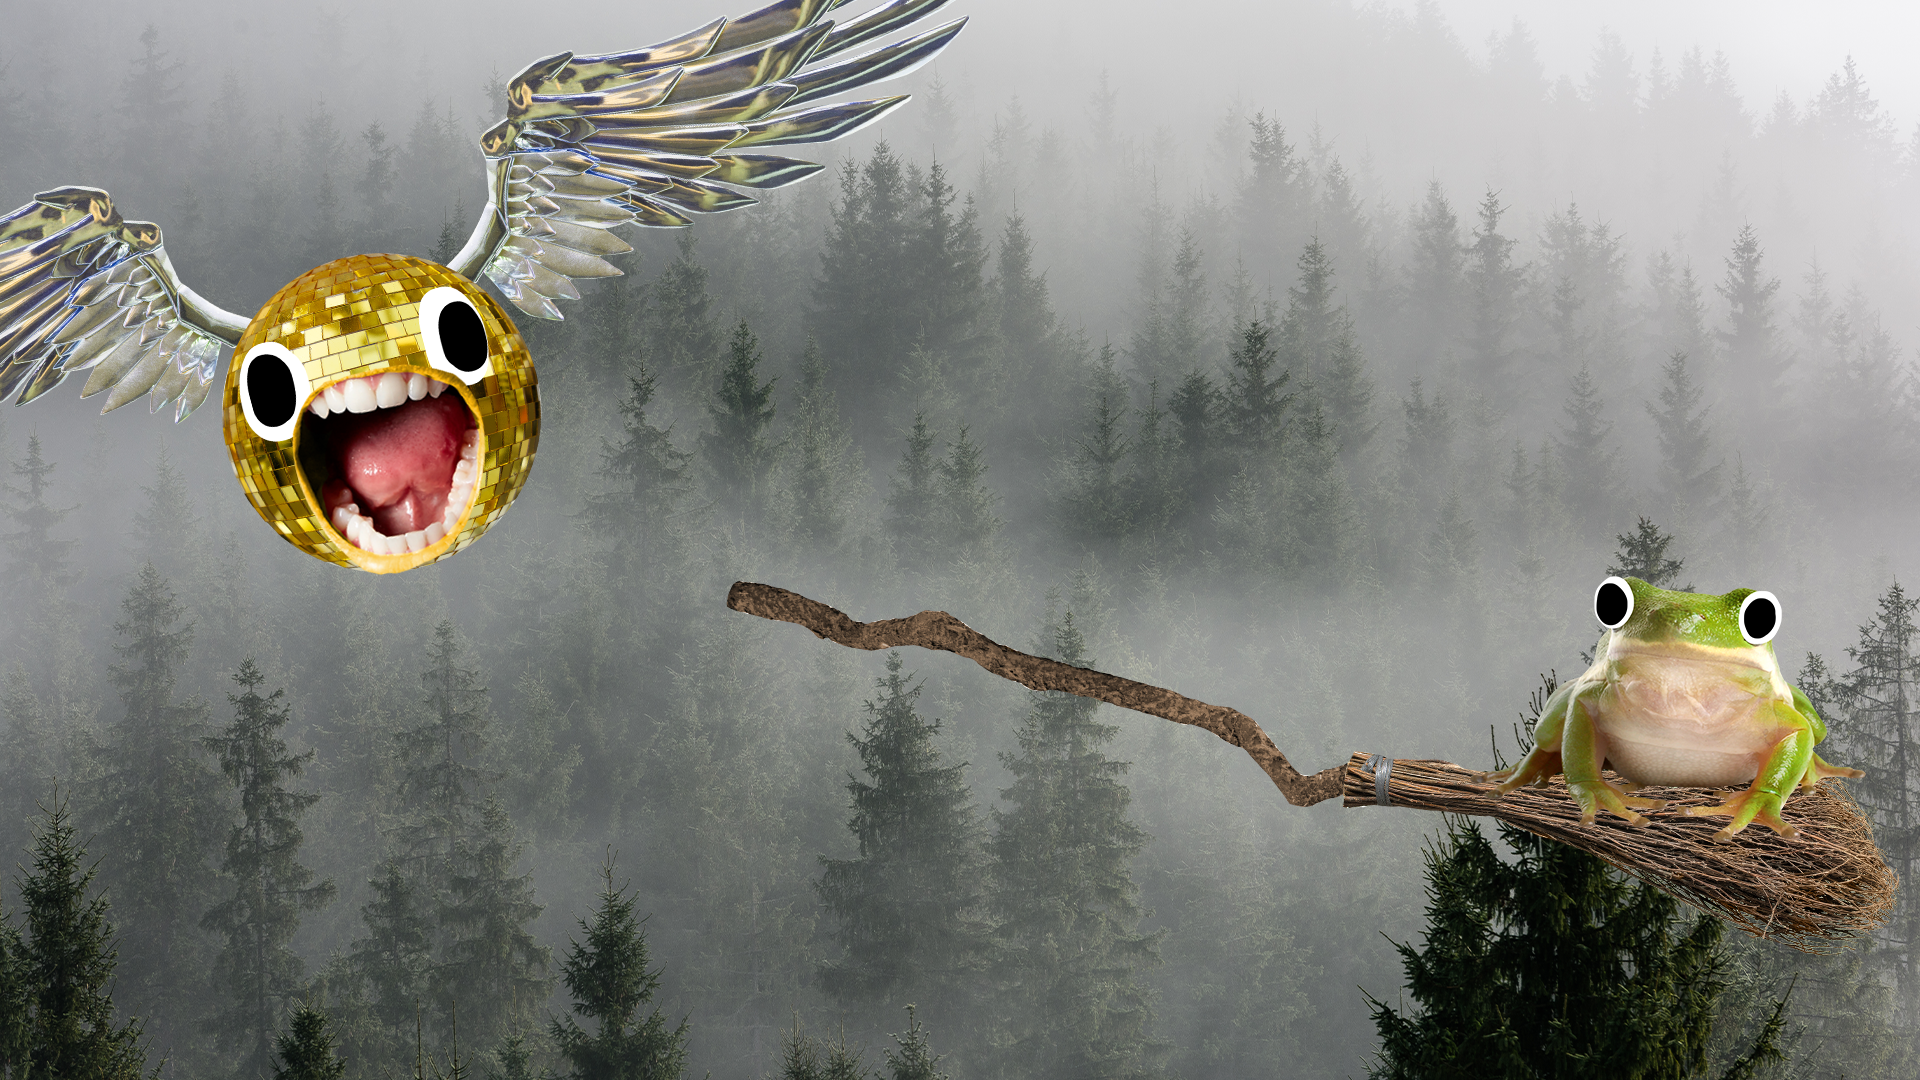 Beano snitch, broom and frog on misty tree background